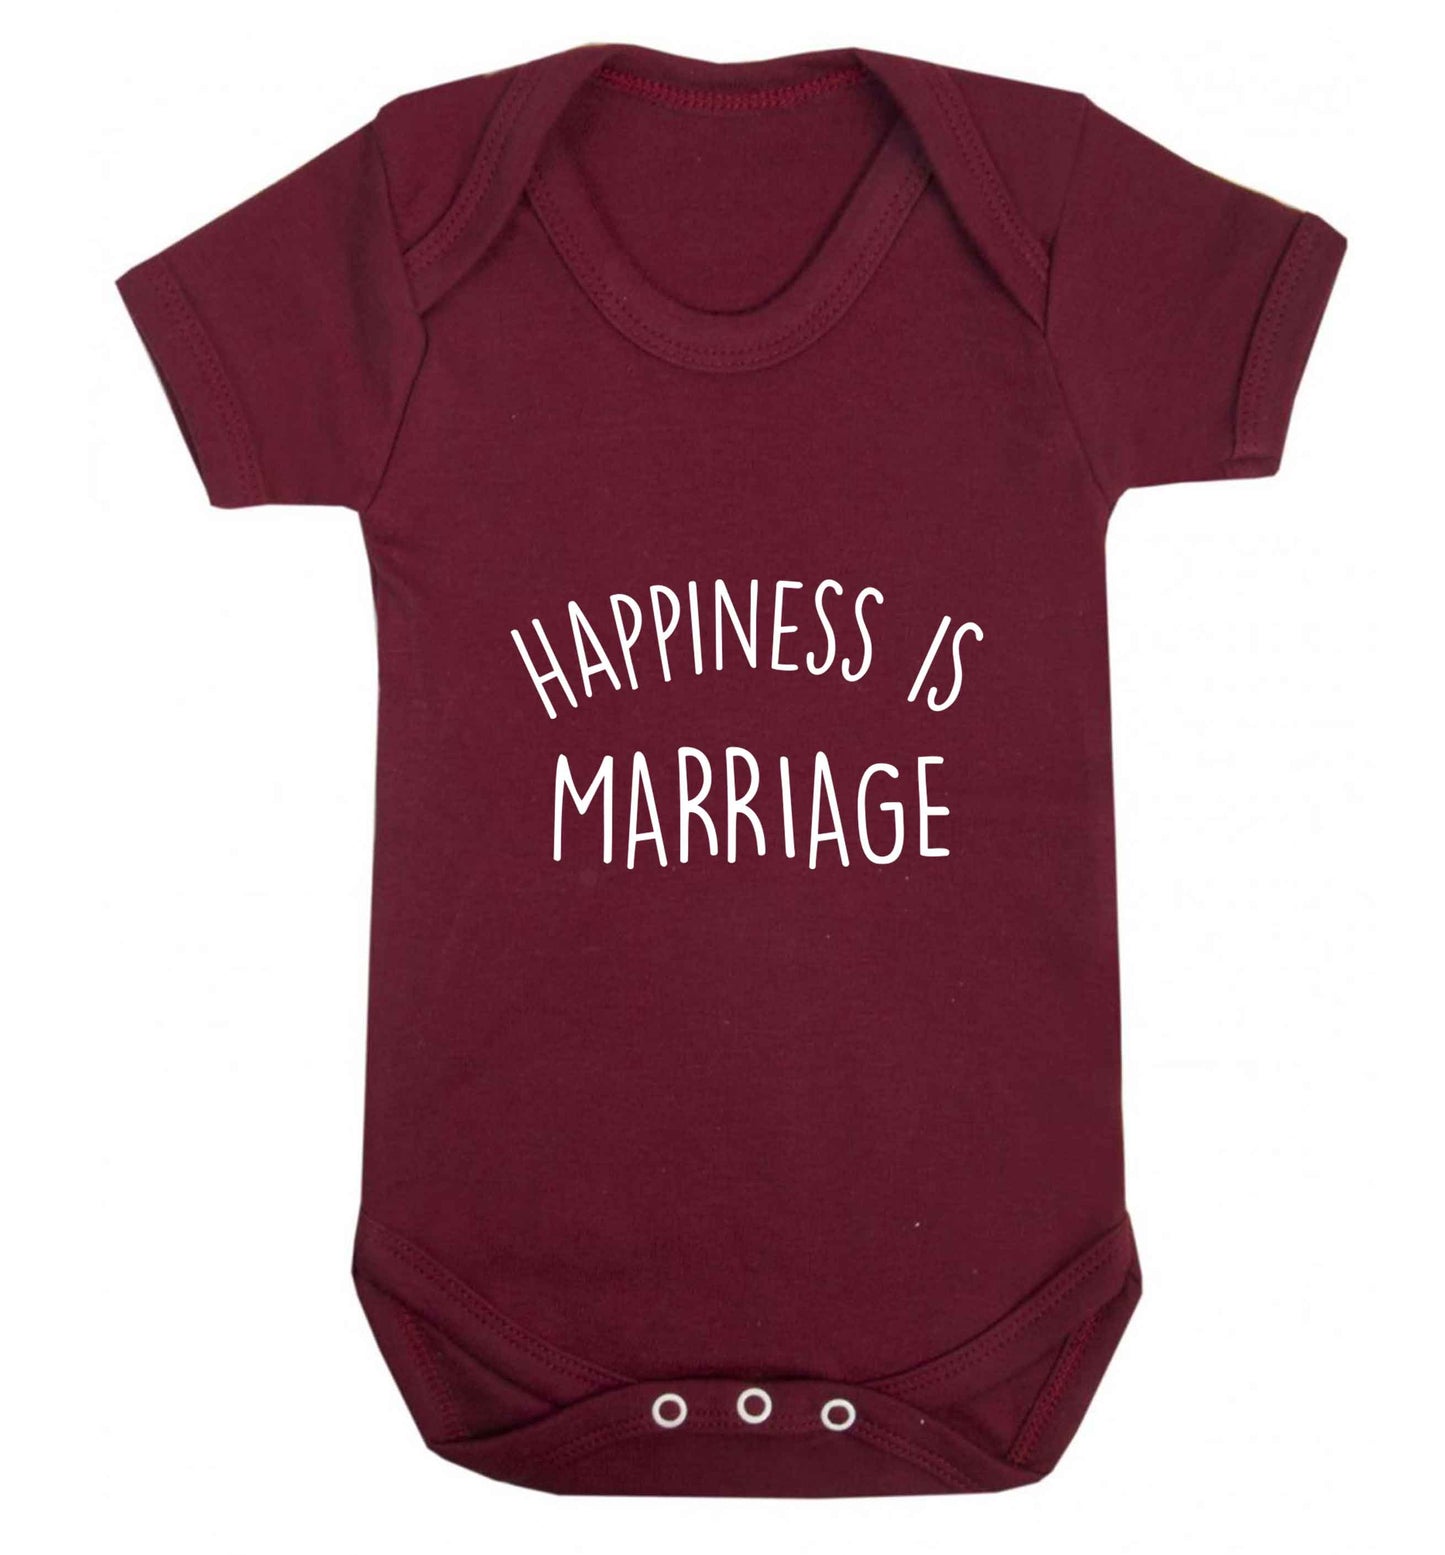 Happiness is wedding planning baby vest maroon 18-24 months